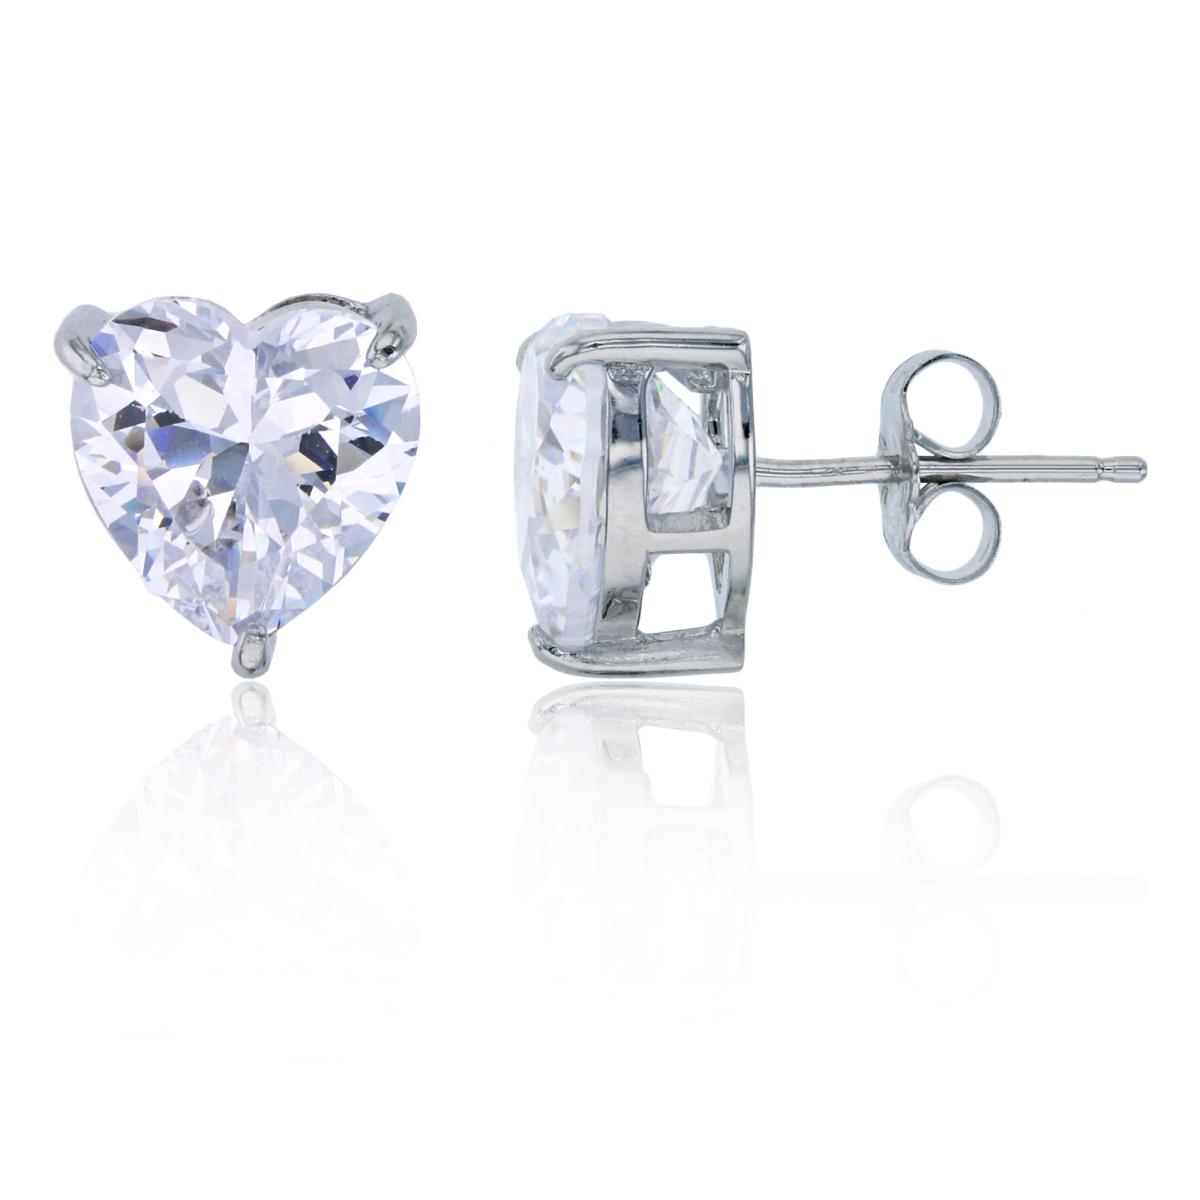 Sterling Silver Rhodium 10mm Heart Cut Solitaire Stud Earring